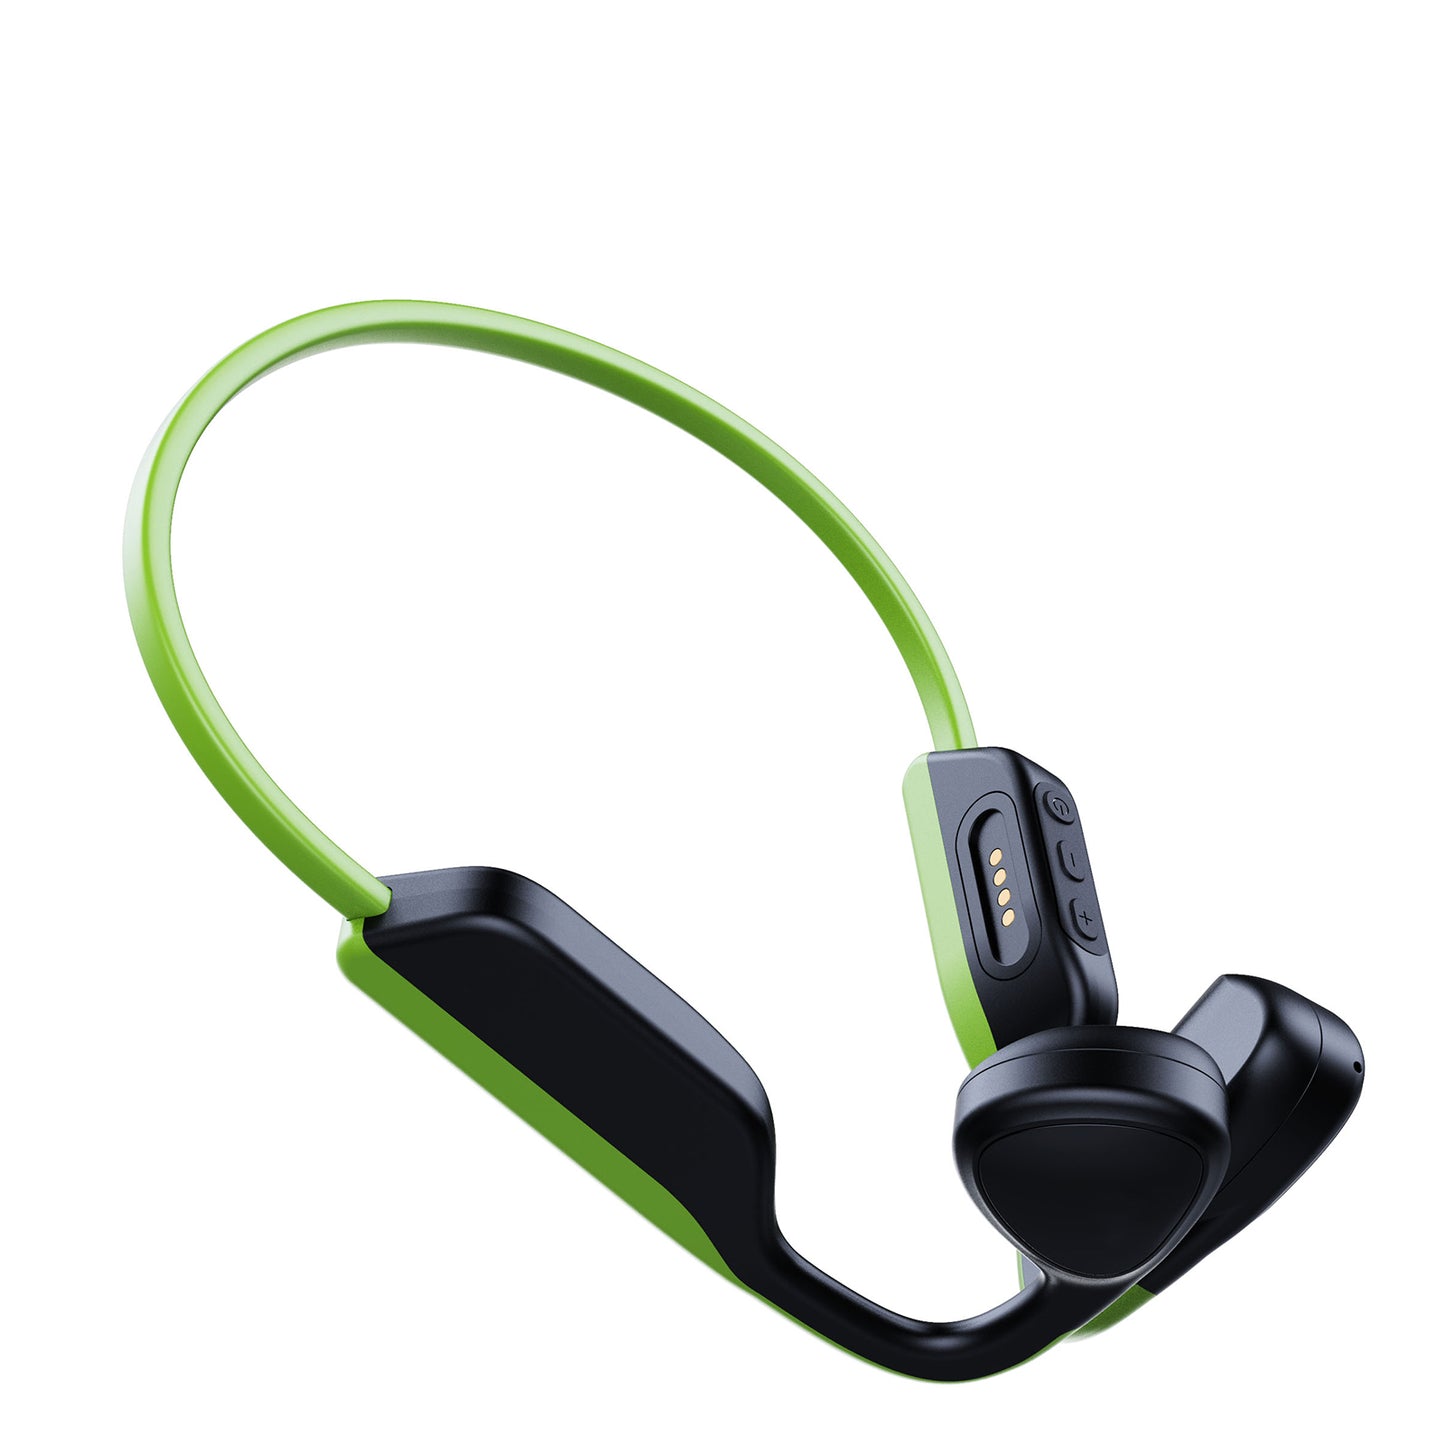 GM Bone conduction Swimming Bluetooth Wireless Headset X19 comes with 8G memory MP3 in-ear running headset